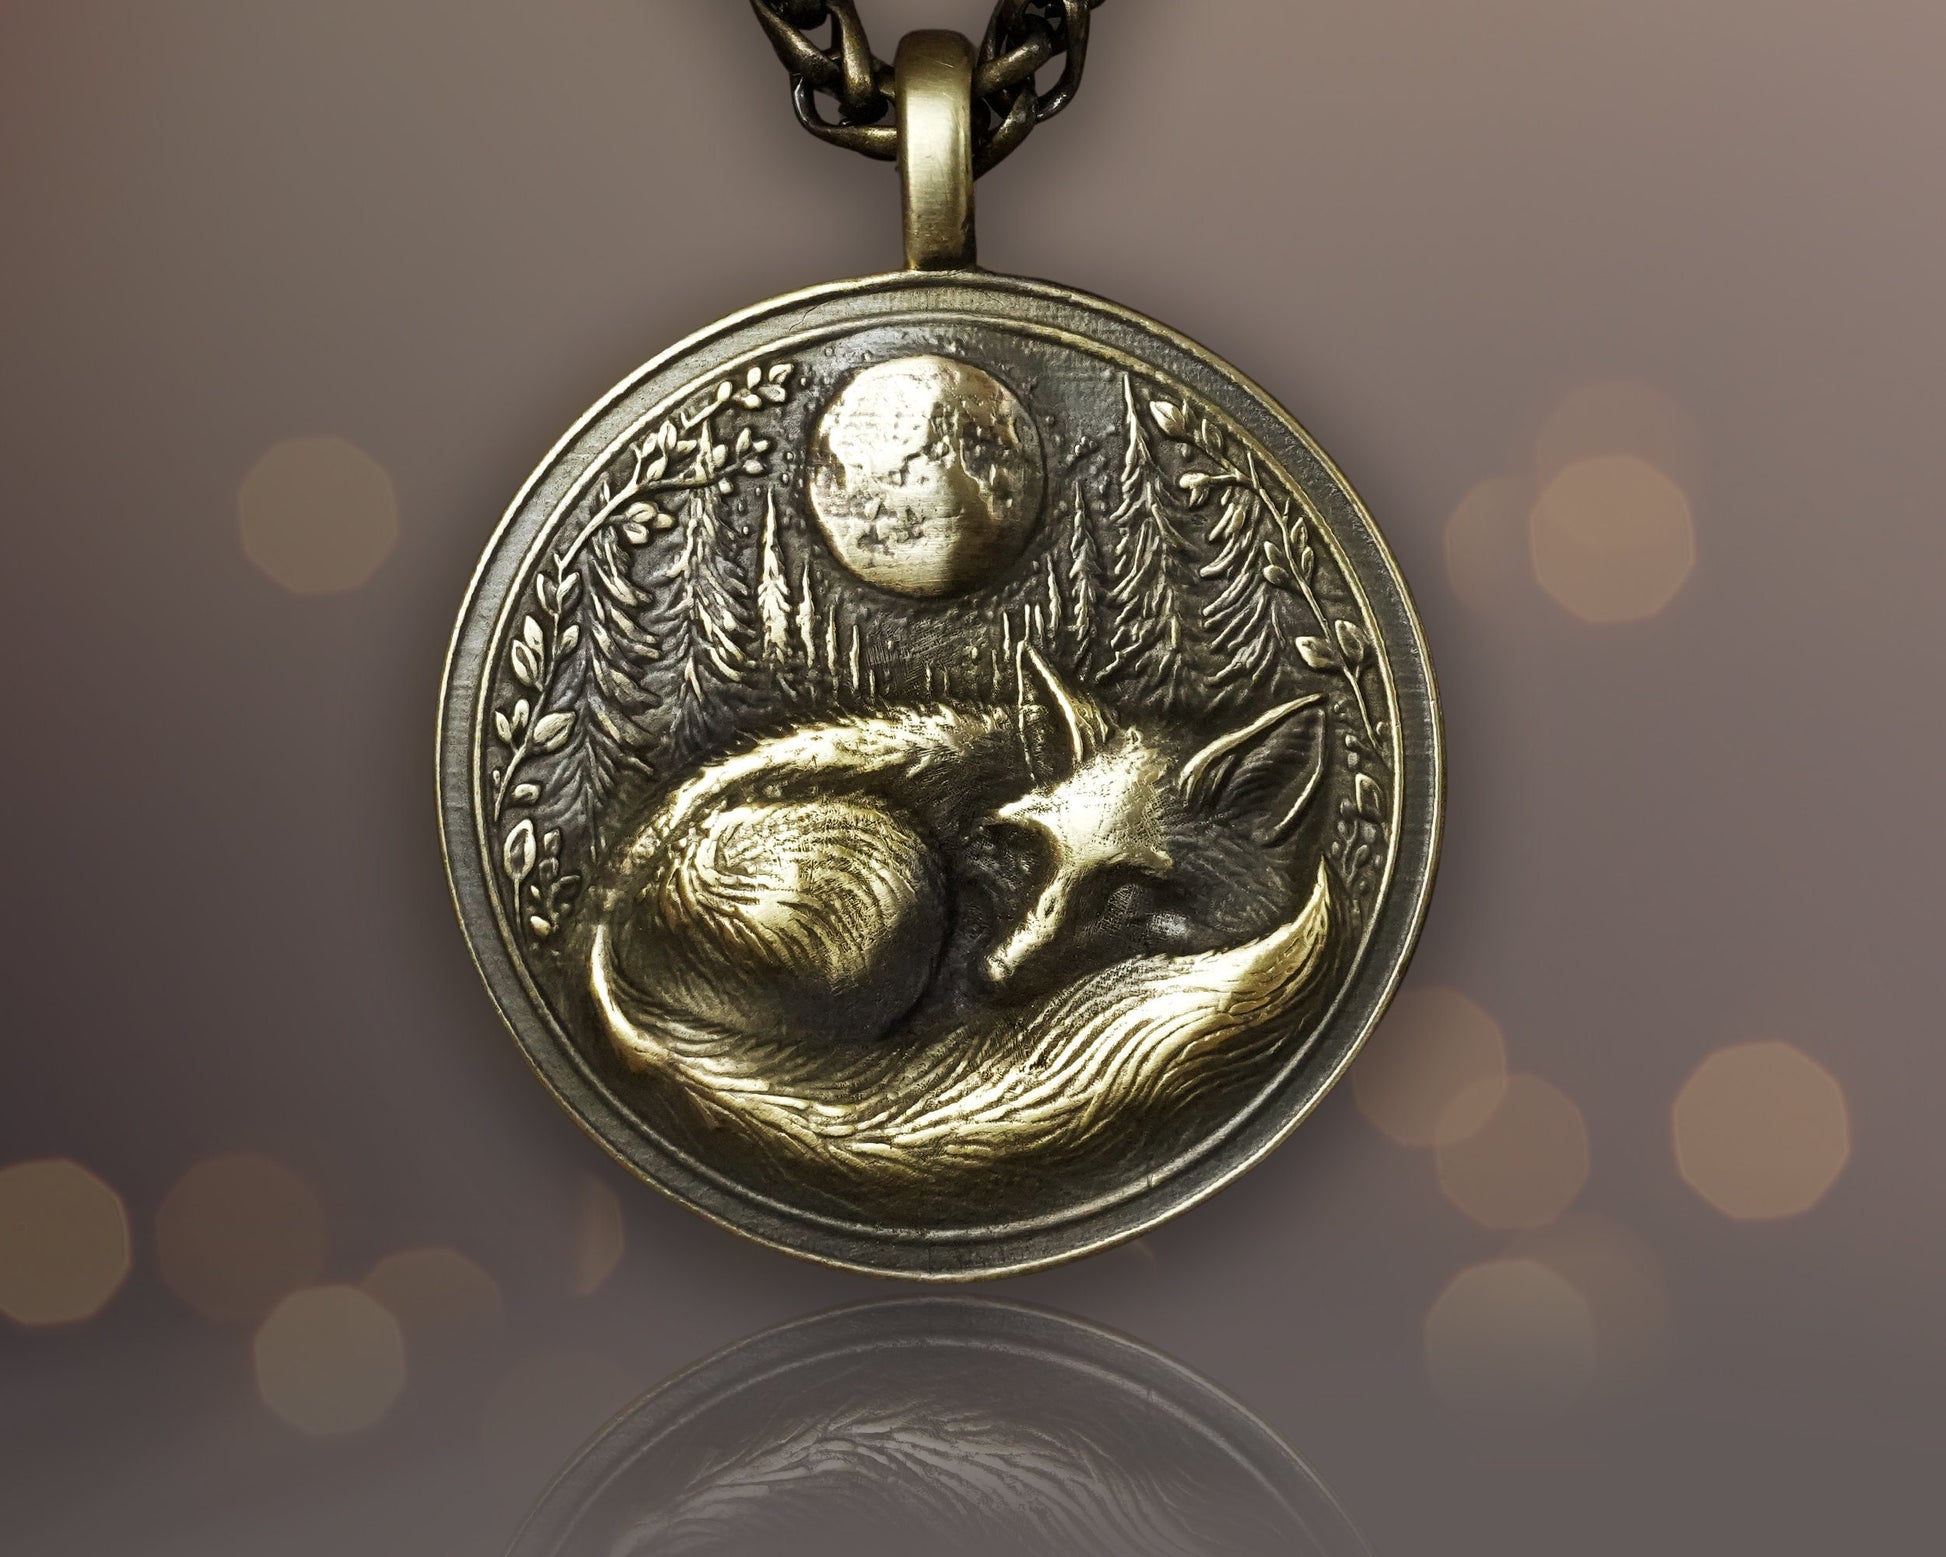 Sleeping Fox in Full Moon Forest Nature Necklace Pendant - Brass and Silver Casting - Handmade in Our Workshop - Comes With Chain - Jewelry - Baldur Jewelry